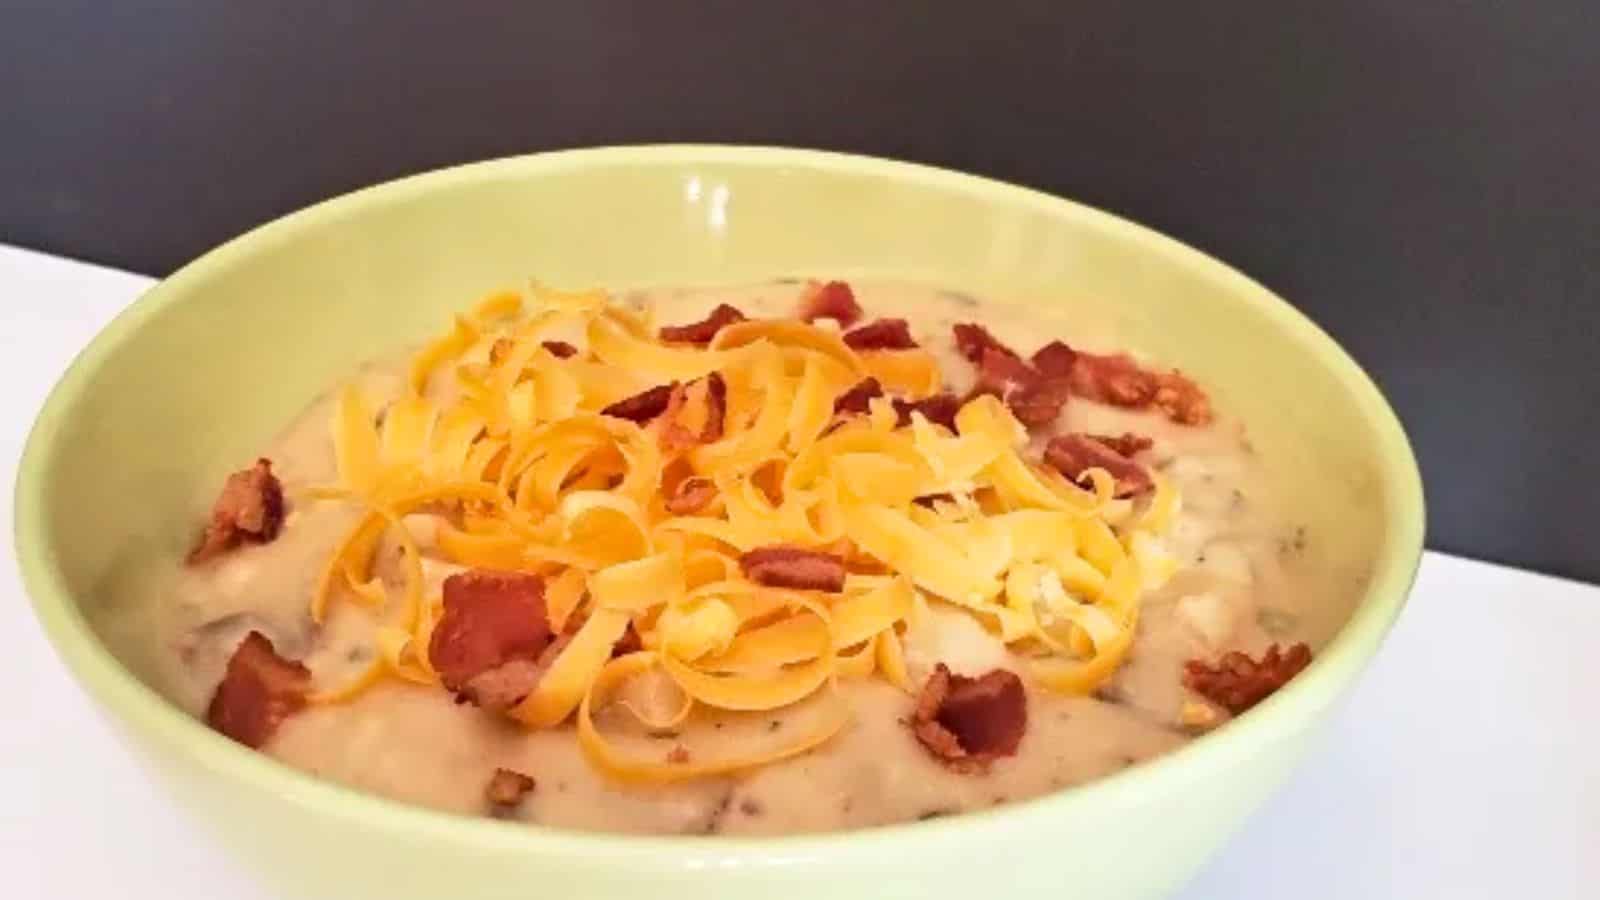 Image shows A bowl of cheesy loaded baked potato soup with bacon and cheese.